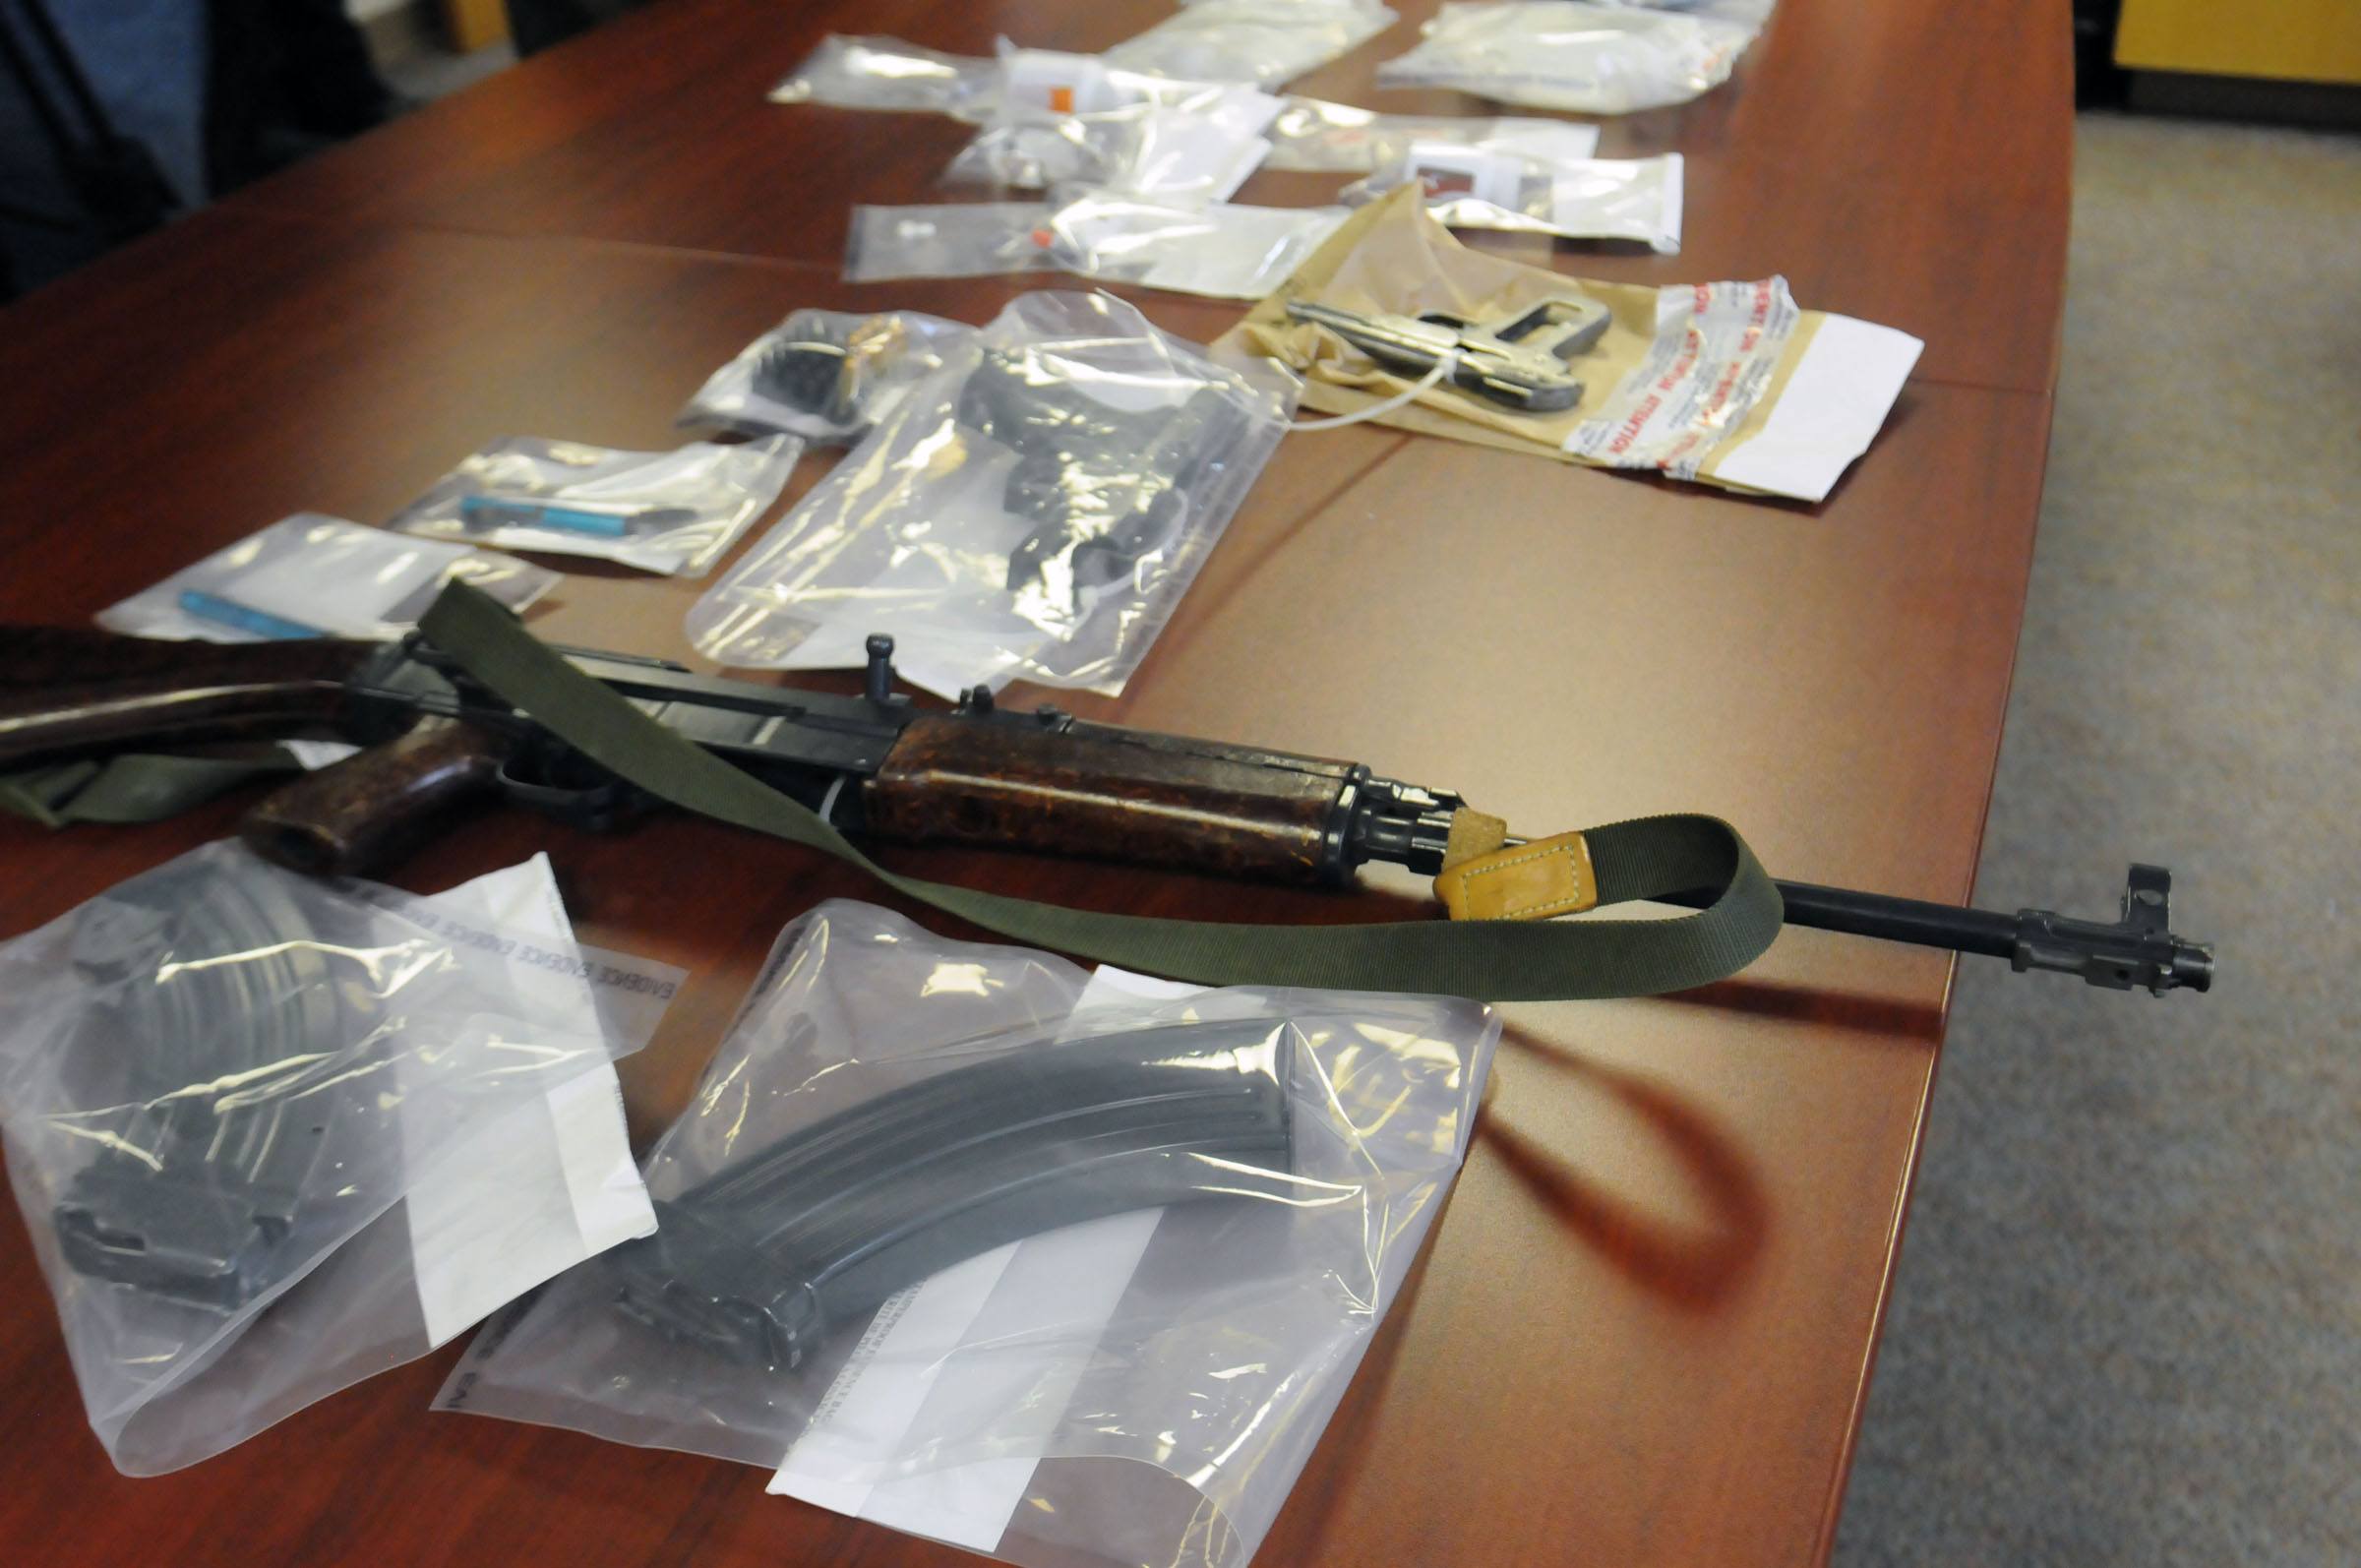 BUST – Red Deer city RCMP display some of the paraphernalia seized during a massive drug investigation recently. A number of individuals from Red Deer and Sylvan Lake have been charged. RCMP also said organized crime is involved in the recent drug bust.